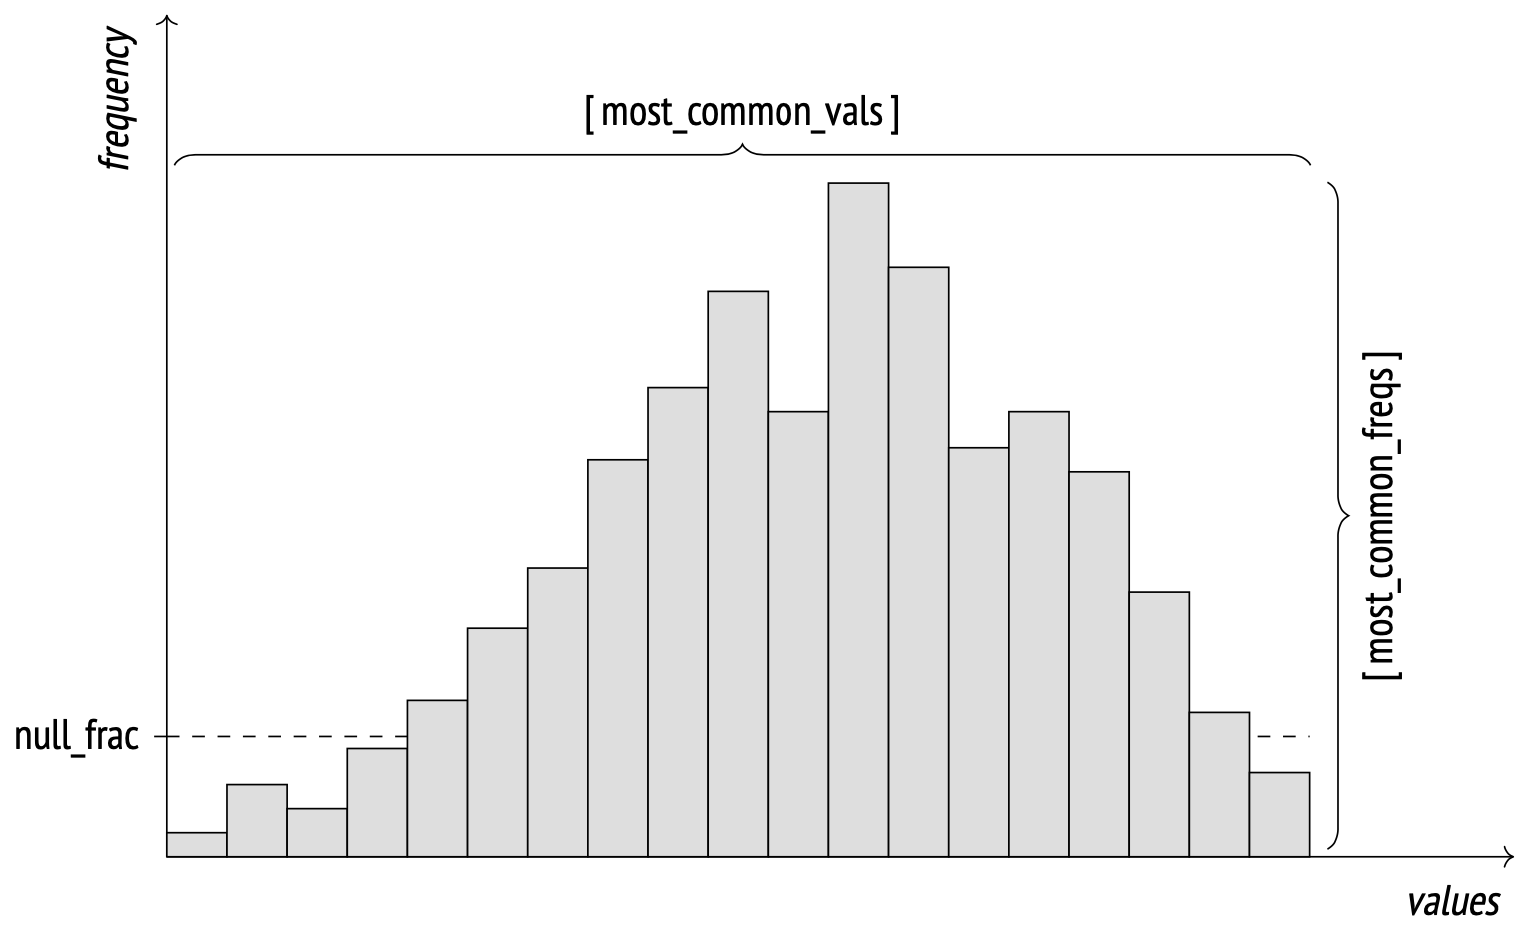 Most common values